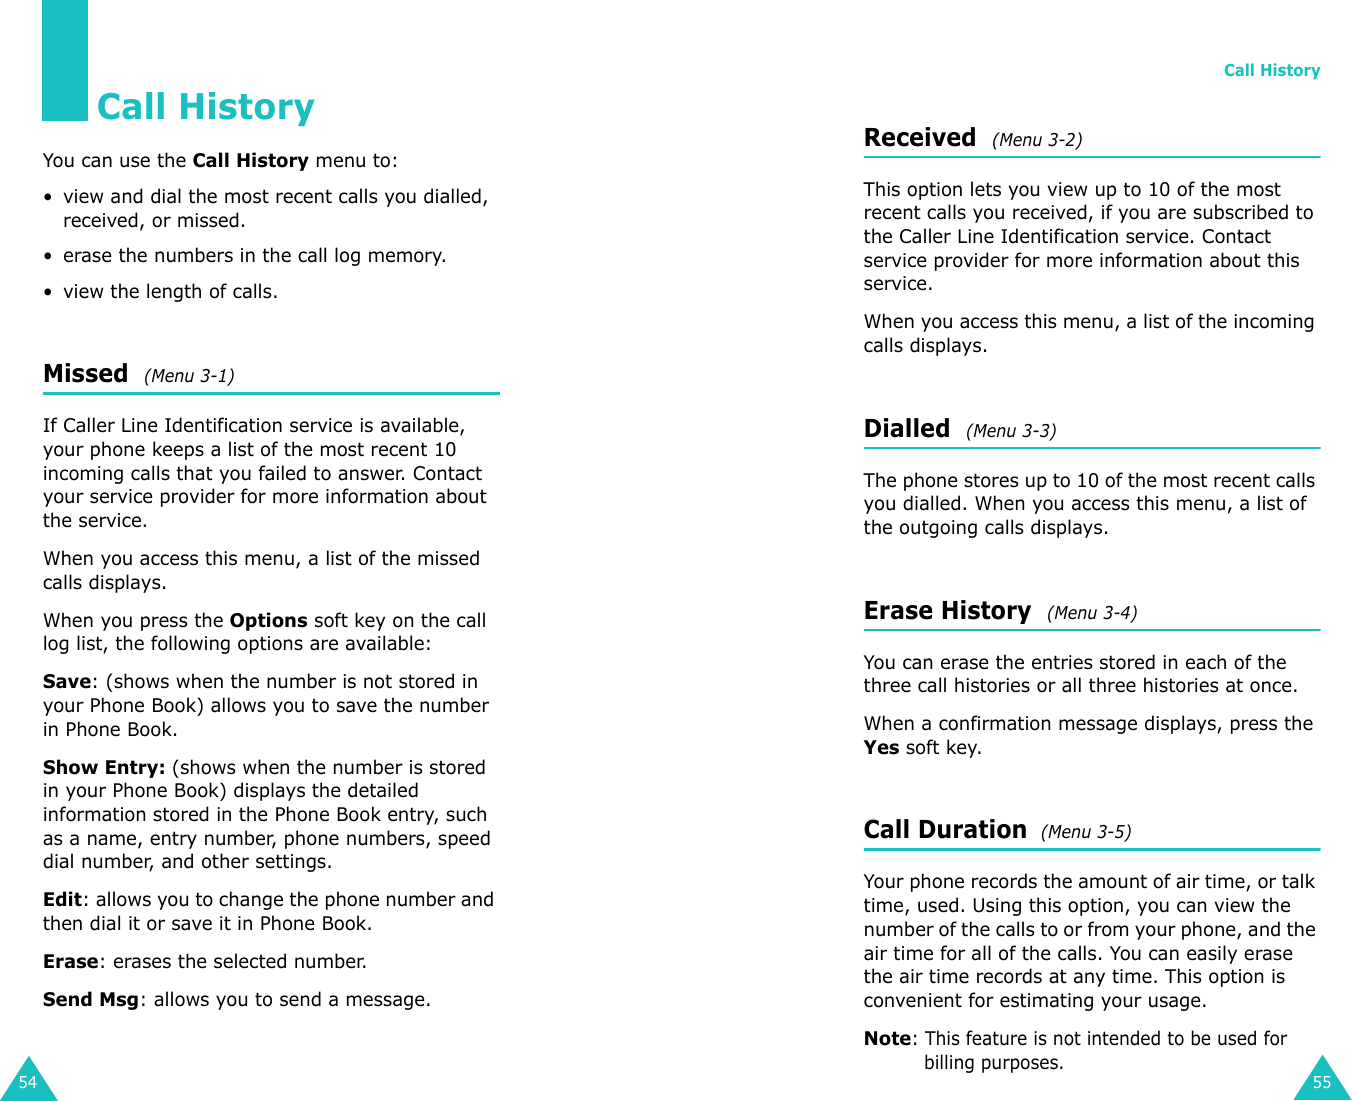 54Call HistoryYou can use the Call History menu to:• view and dial the most recent calls you dialled, received, or missed. • erase the numbers in the call log memory.• view the length of calls.Missed  (Menu 3-1)If Caller Line Identification service is available, your phone keeps a list of the most recent 10 incoming calls that you failed to answer. Contact your service provider for more information about the service. When you access this menu, a list of the missed calls displays.When you press the Options soft key on the call log list, the following options are available:Save: (shows when the number is not stored in your Phone Book) allows you to save the number in Phone Book.Show Entry: (shows when the number is stored in your Phone Book) displays the detailed information stored in the Phone Book entry, such as a name, entry number, phone numbers, speed dial number, and other settings.Edit: allows you to change the phone number and then dial it or save it in Phone Book.Erase: erases the selected number.Send Msg: allows you to send a message. Call History55Received  (Menu 3-2)This option lets you view up to 10 of the most recent calls you received, if you are subscribed to the Caller Line Identification service. Contact service provider for more information about this service. When you access this menu, a list of the incoming calls displays.Dialled  (Menu 3-3)The phone stores up to 10 of the most recent calls you dialled. When you access this menu, a list of the outgoing calls displays.Erase History  (Menu 3-4)You can erase the entries stored in each of the three call histories or all three histories at once.When a confirmation message displays, press the Yes soft key.Call Duration  (Menu 3-5)Your phone records the amount of air time, or talk time, used. Using this option, you can view the number of the calls to or from your phone, and the air time for all of the calls. You can easily erase the air time records at any time. This option is convenient for estimating your usage.Note: This feature is not intended to be used for billing purposes.